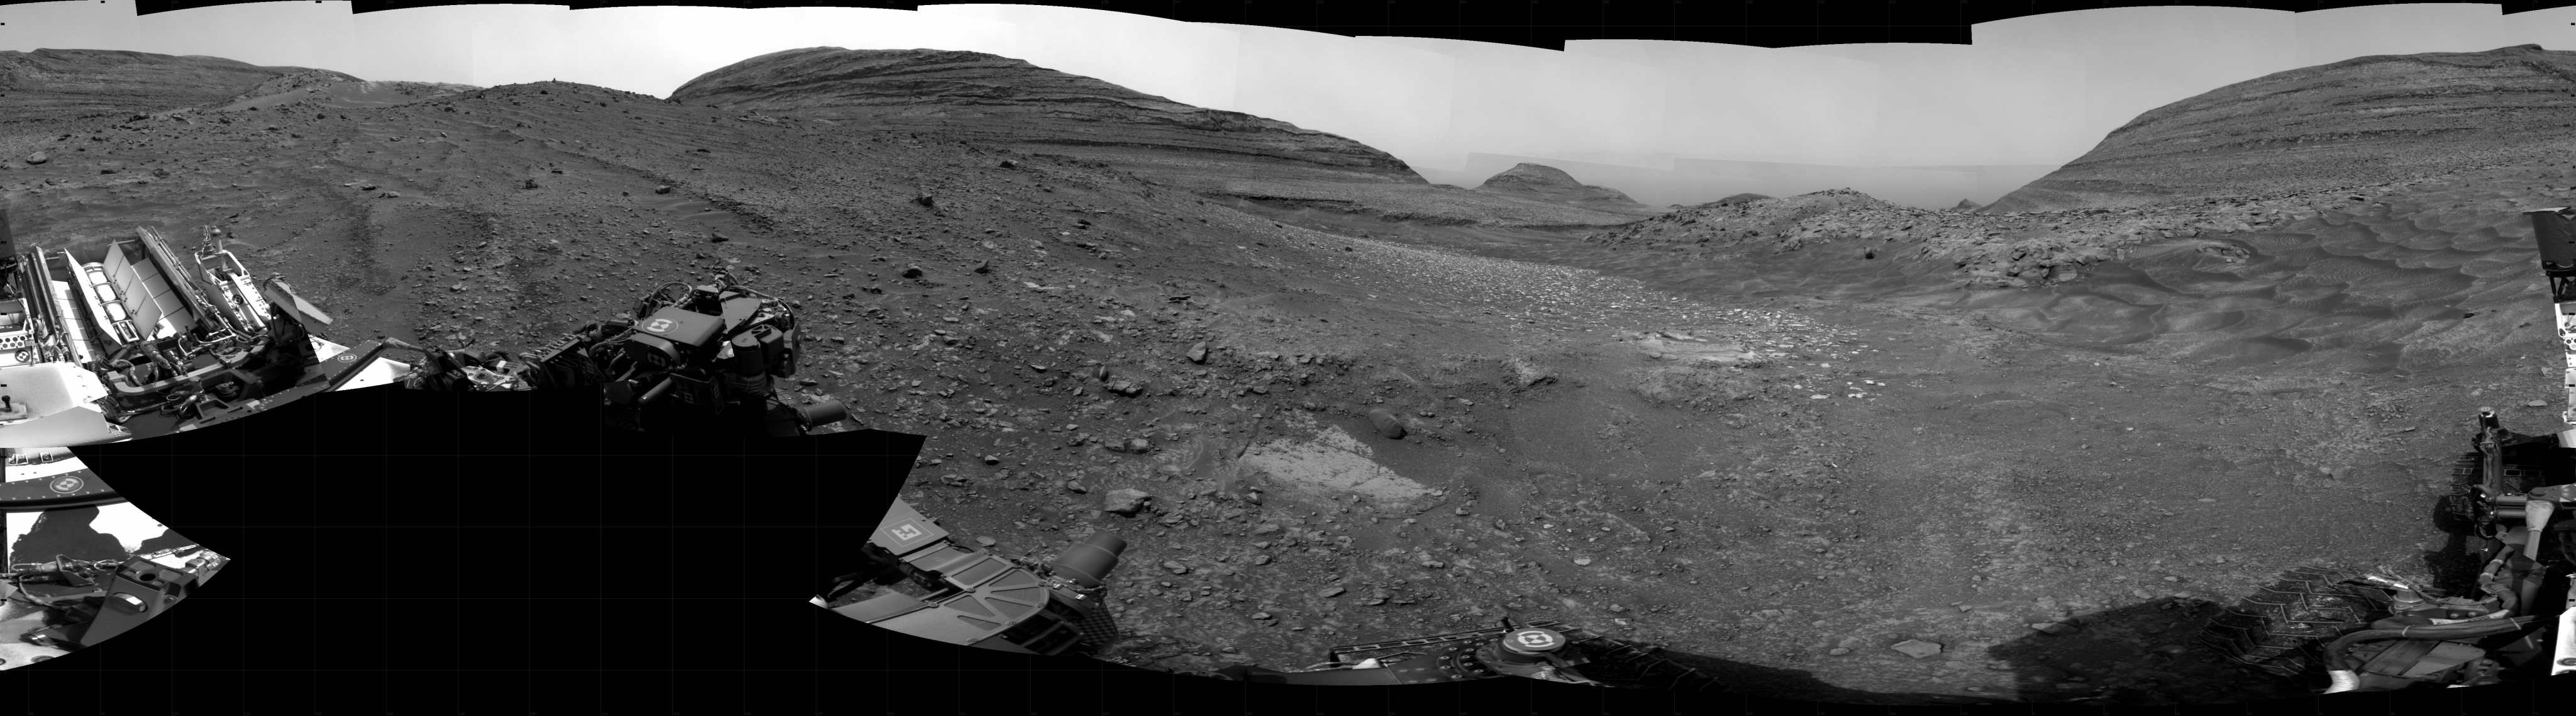 Curiosity took the images on May 27, 2024, Sol 4197 of the Mars Science Laboratory mission at drive 2394, site number 107. The local mean solar time for the image exposures was from 1 PM to 12 PM.